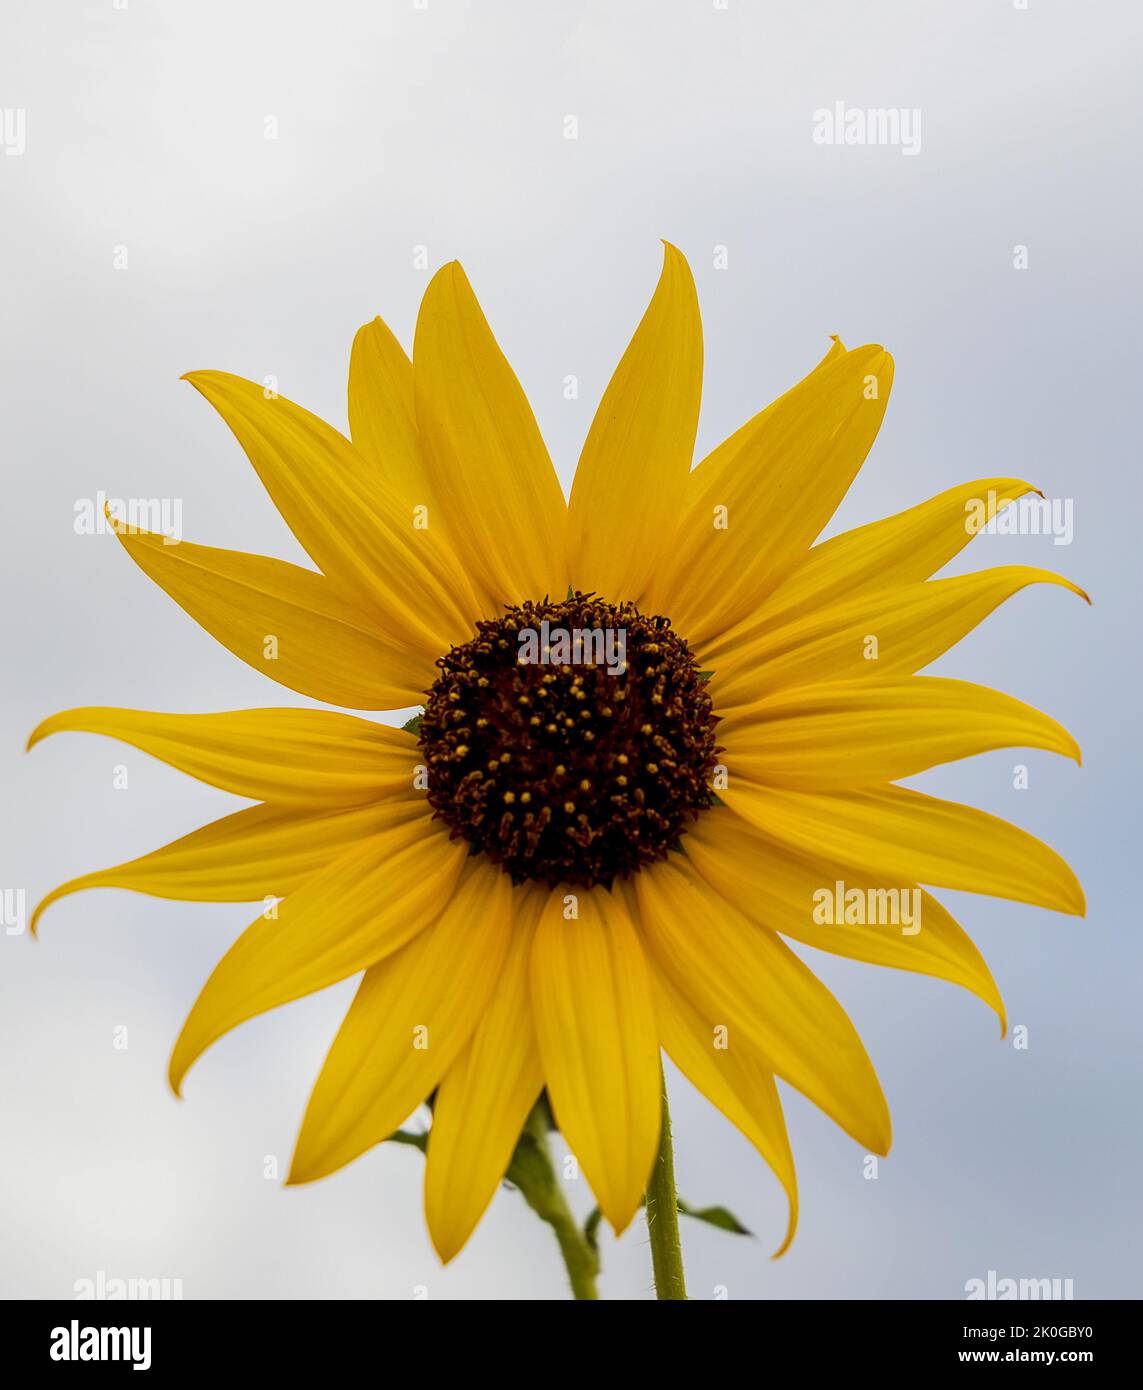 Yellow flowering racemose radiate head inflorescence of a wild sunflower, Helianthus Annuus, Asteraceae, native annual herb in Colorado Stock Photo